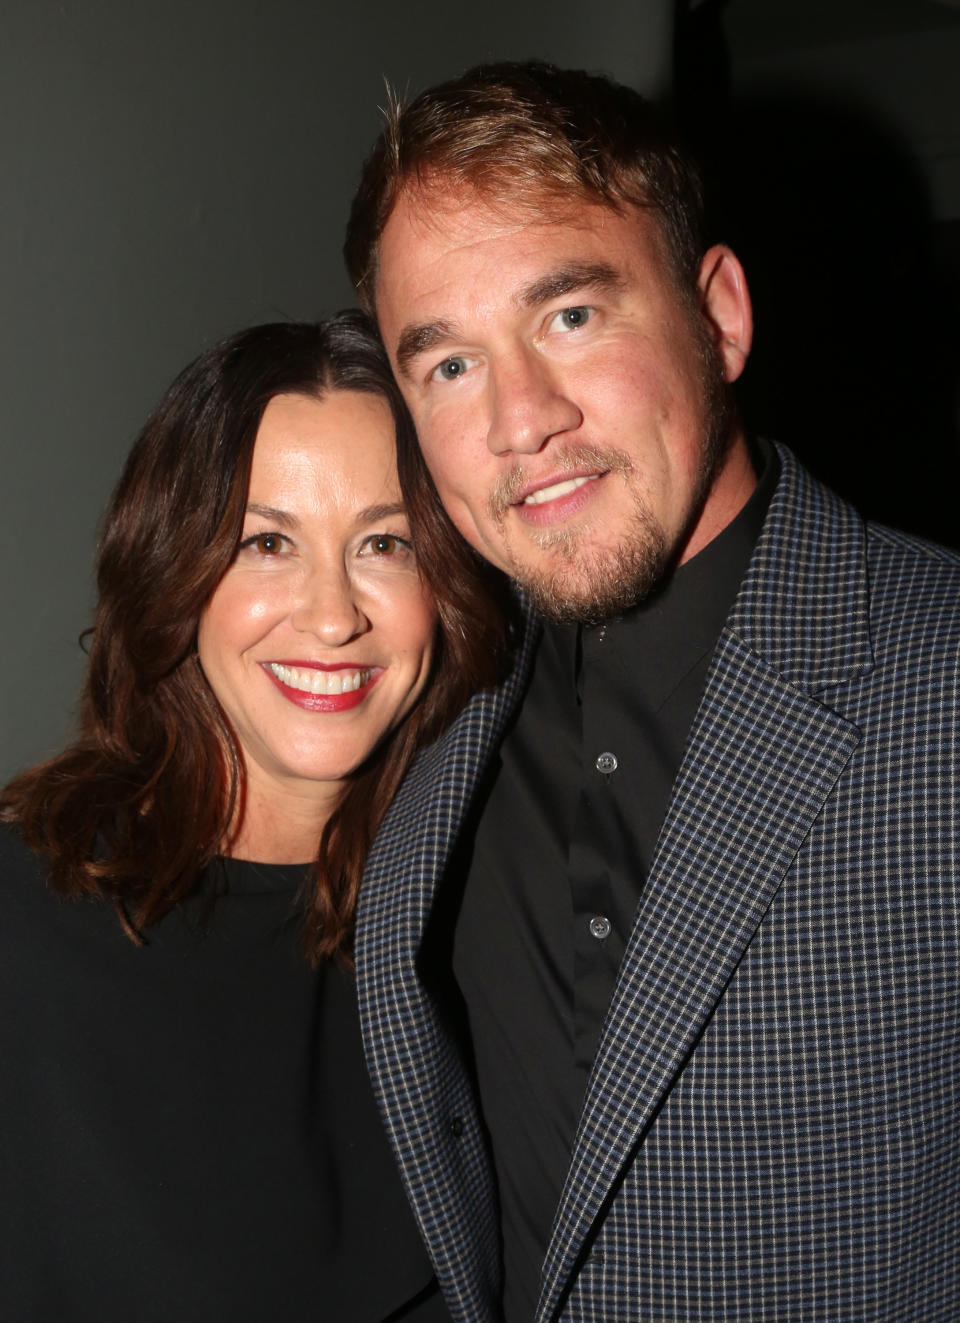 Alanis Morissette and Souleye.